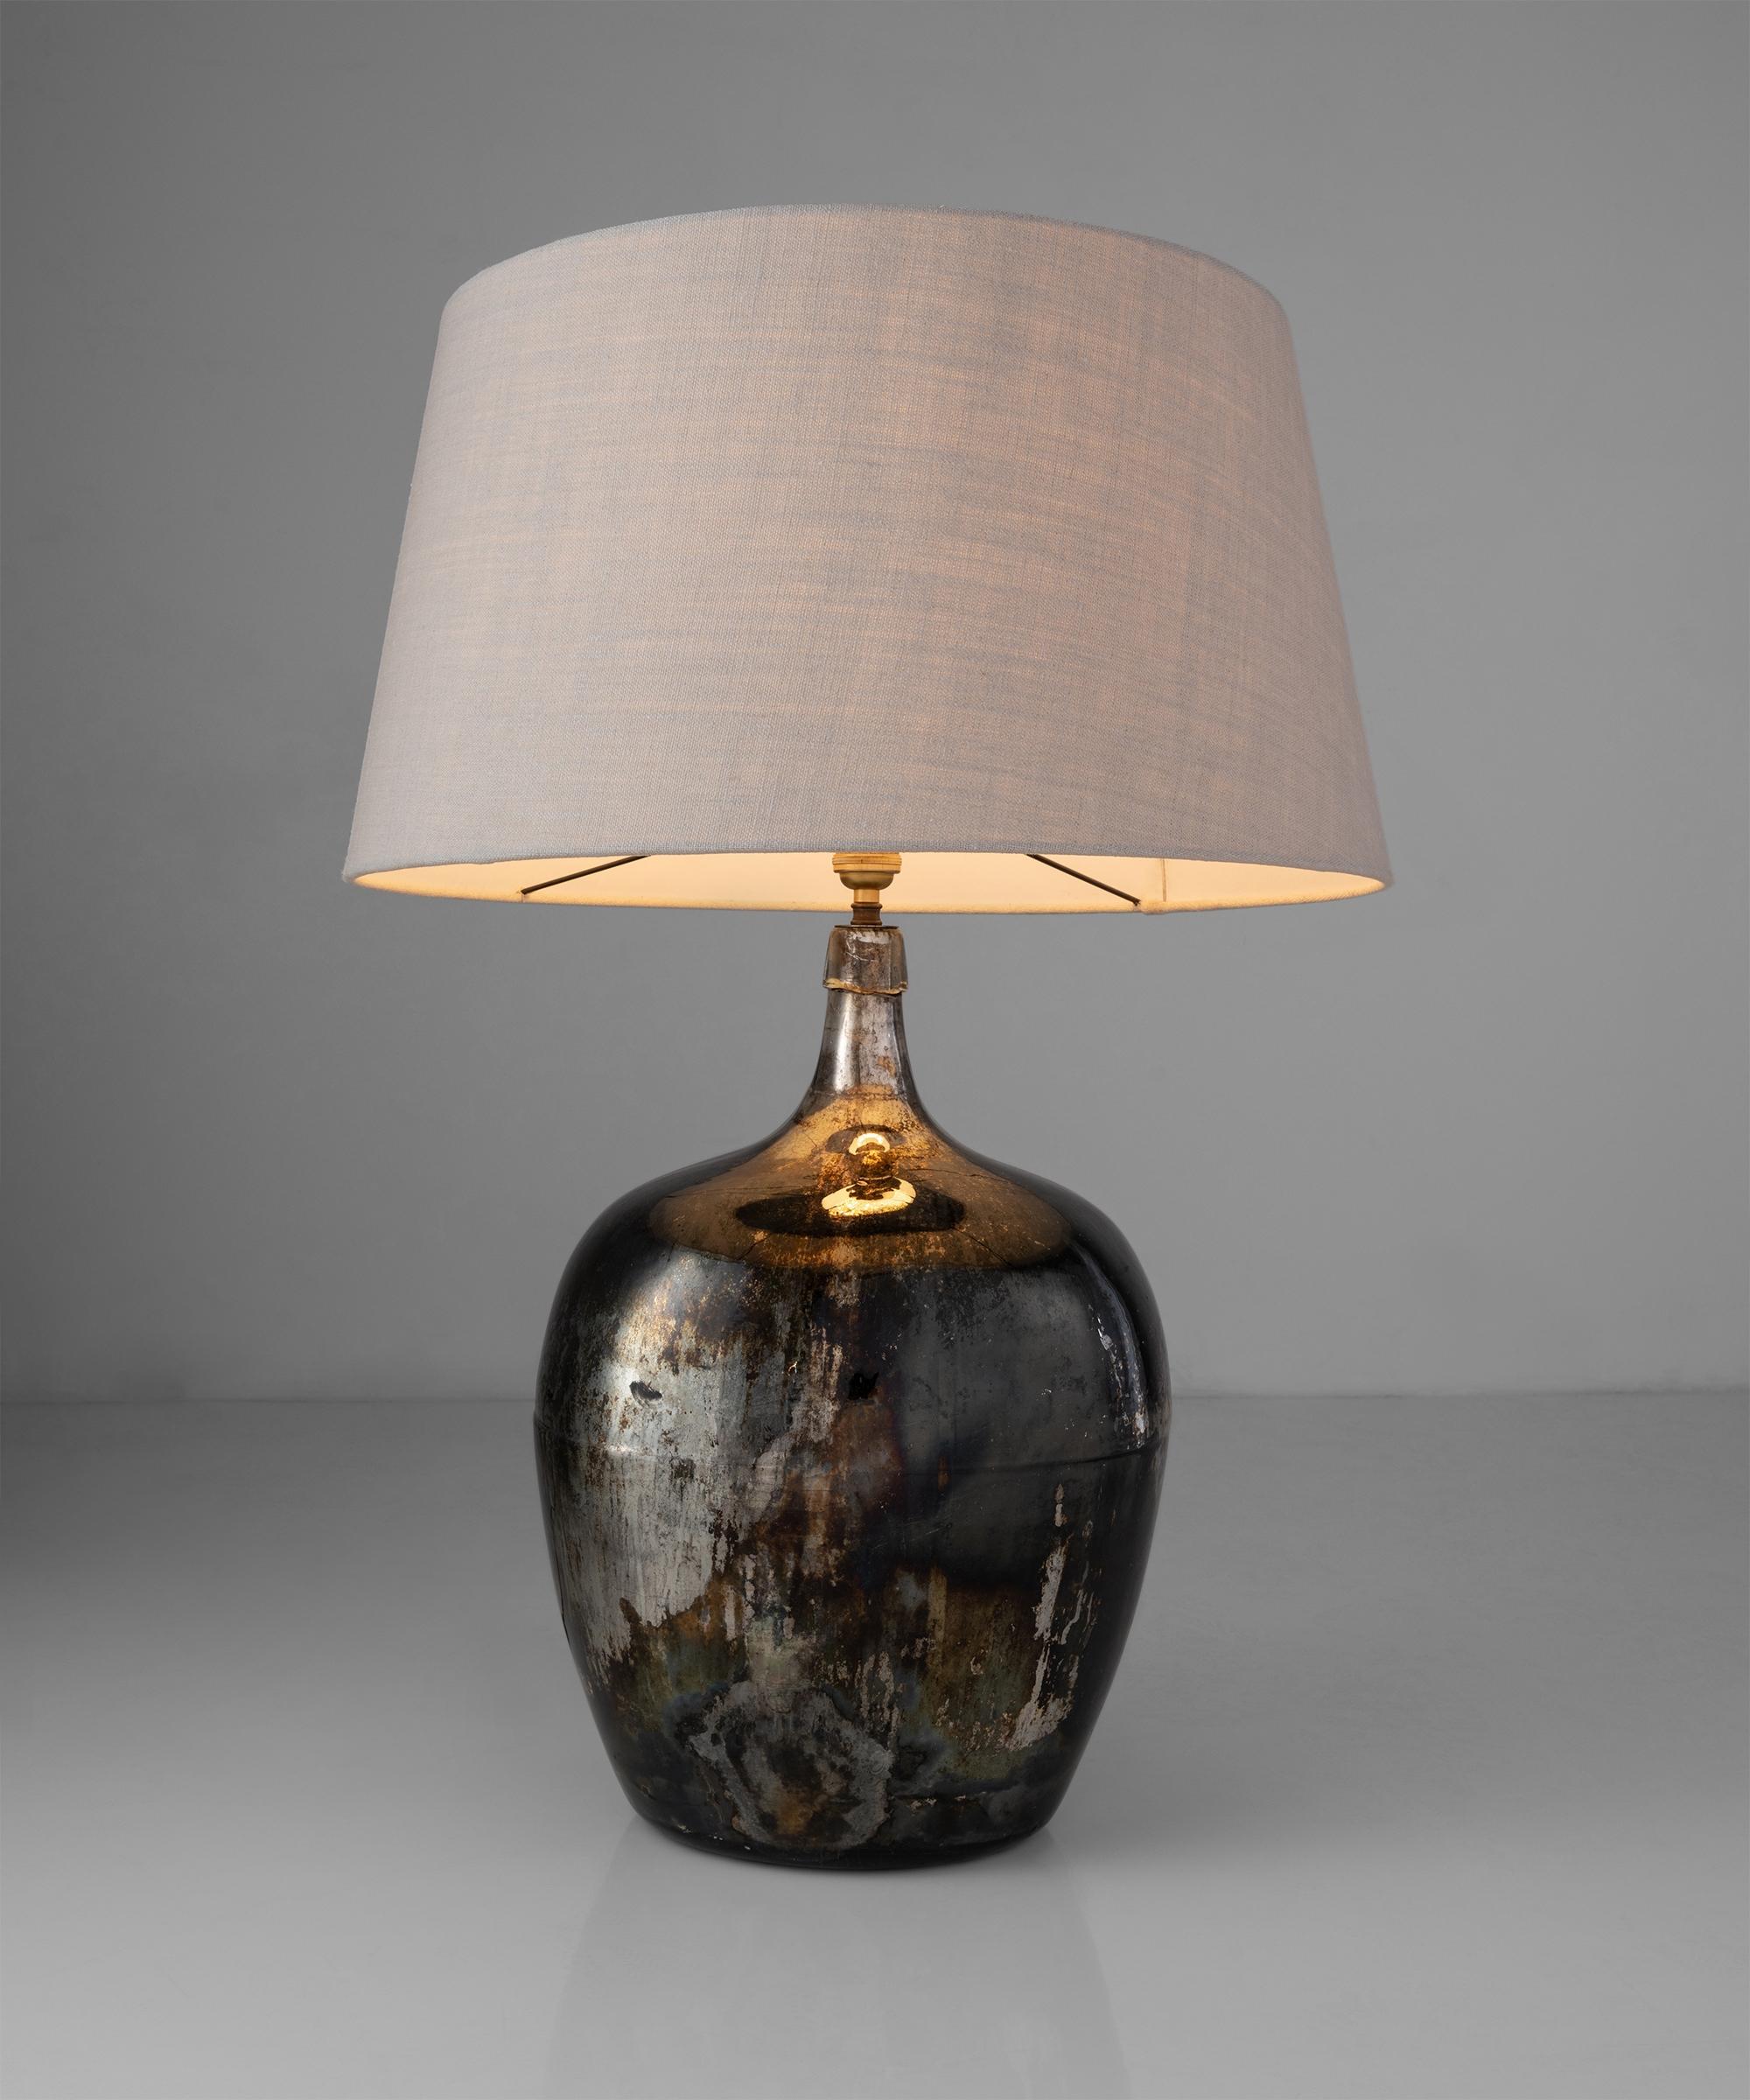 French Mercury Glass Table Lamp #2, France circa 1870